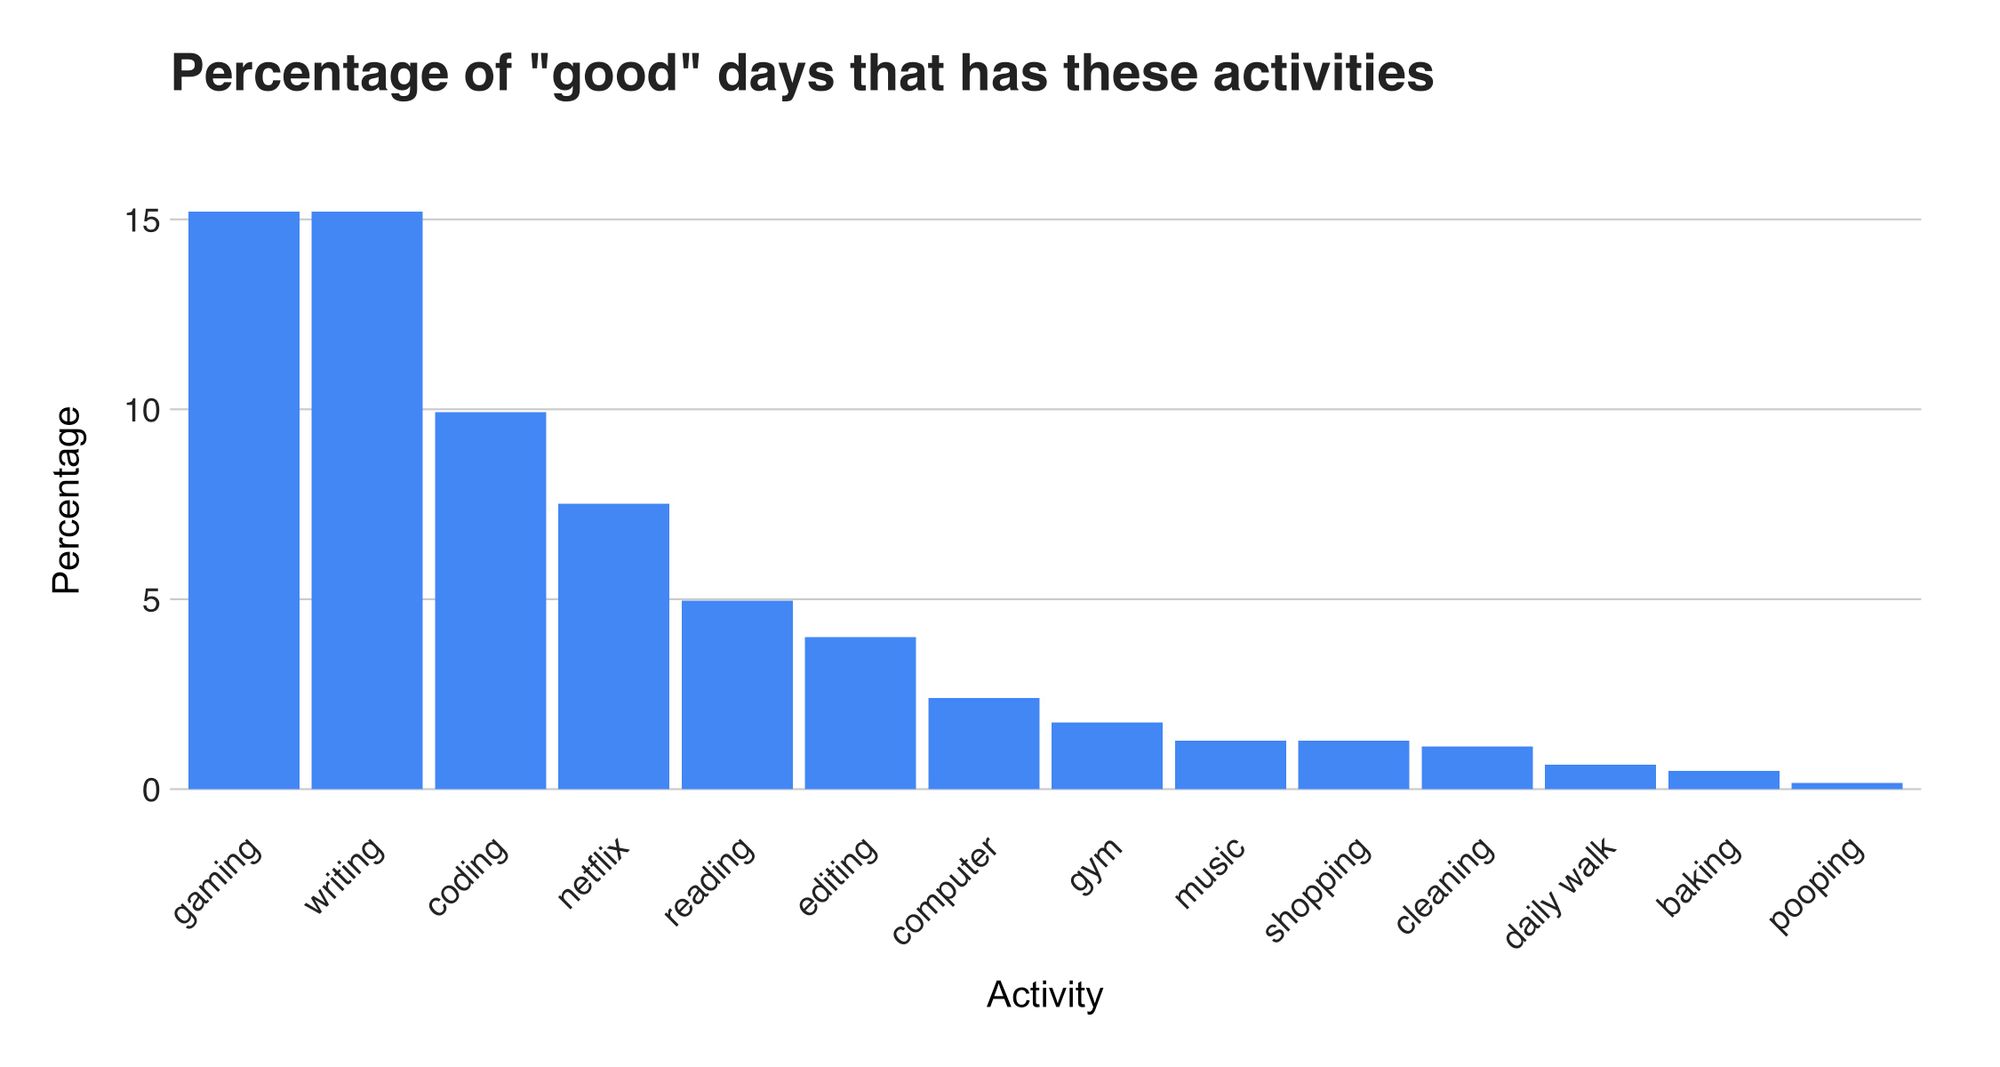 Figure 17: Percentage of "good" days with these activities.